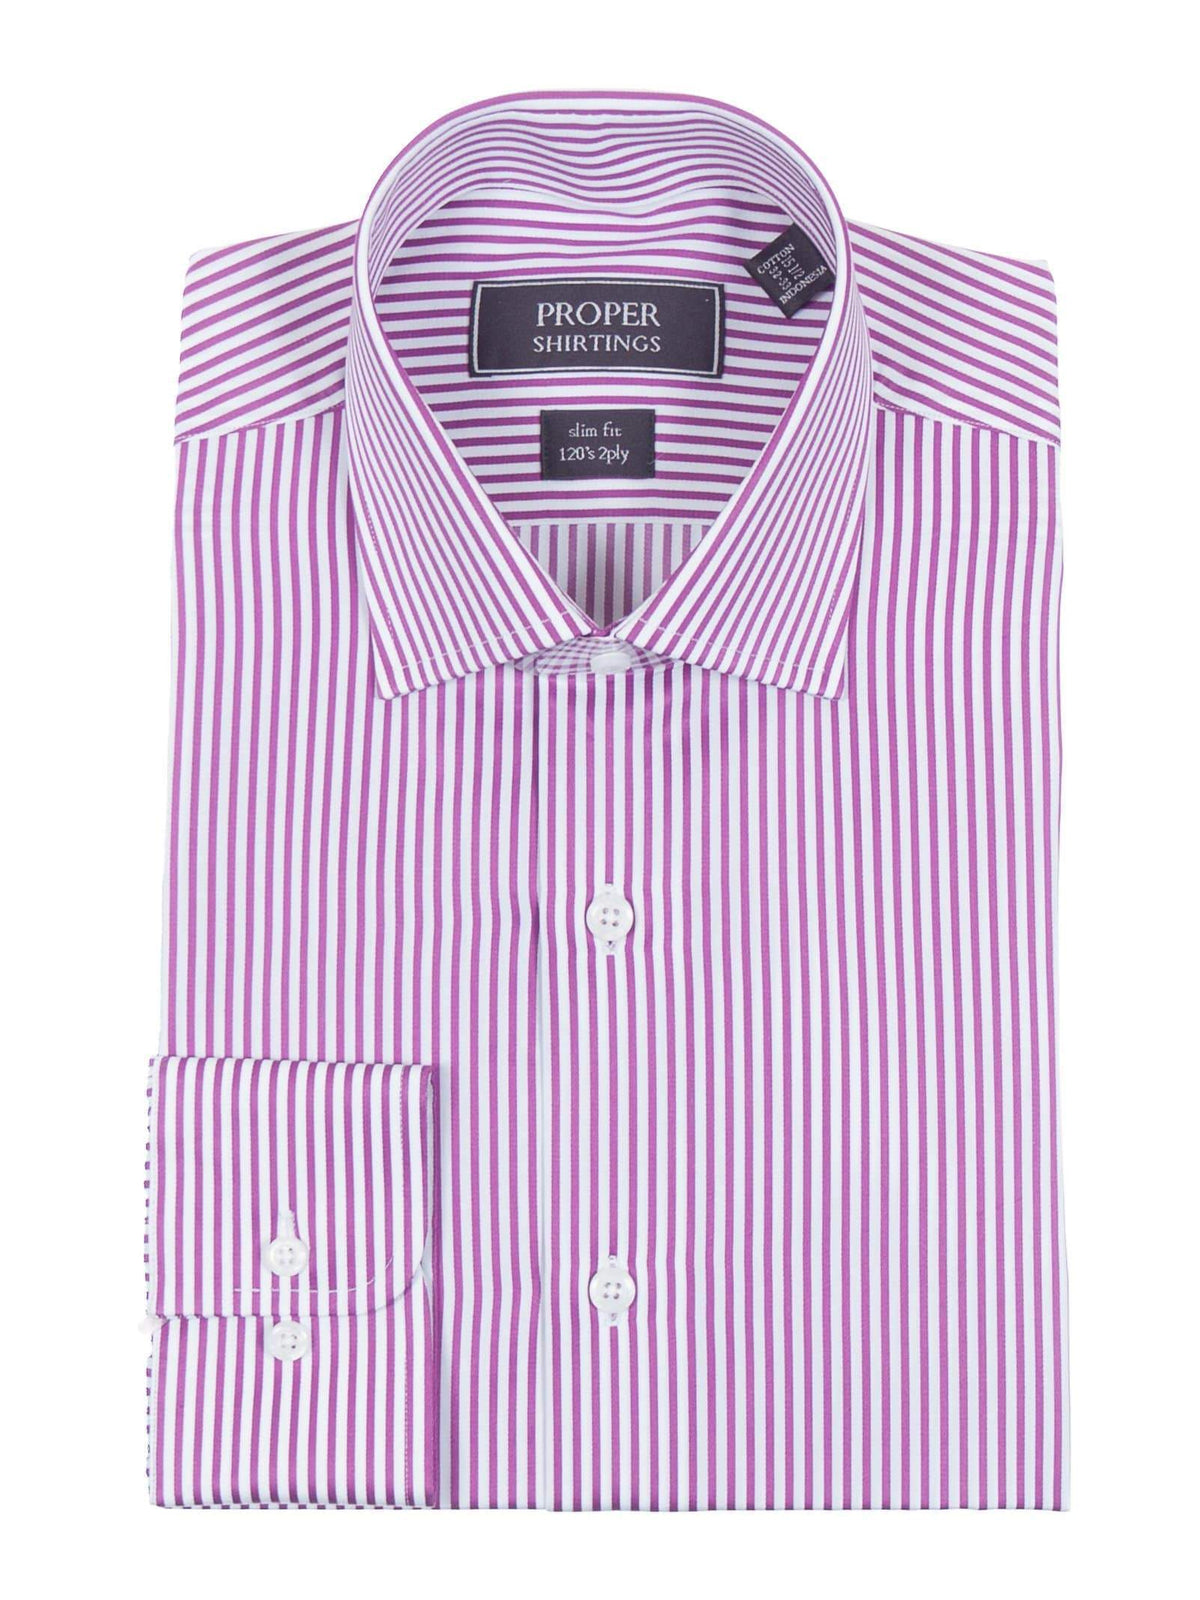 Proper Shirtings SHIRTS Slim Fit Orchid Pink Striped Spread Collar 2 Ply Cotton Dress Shirt